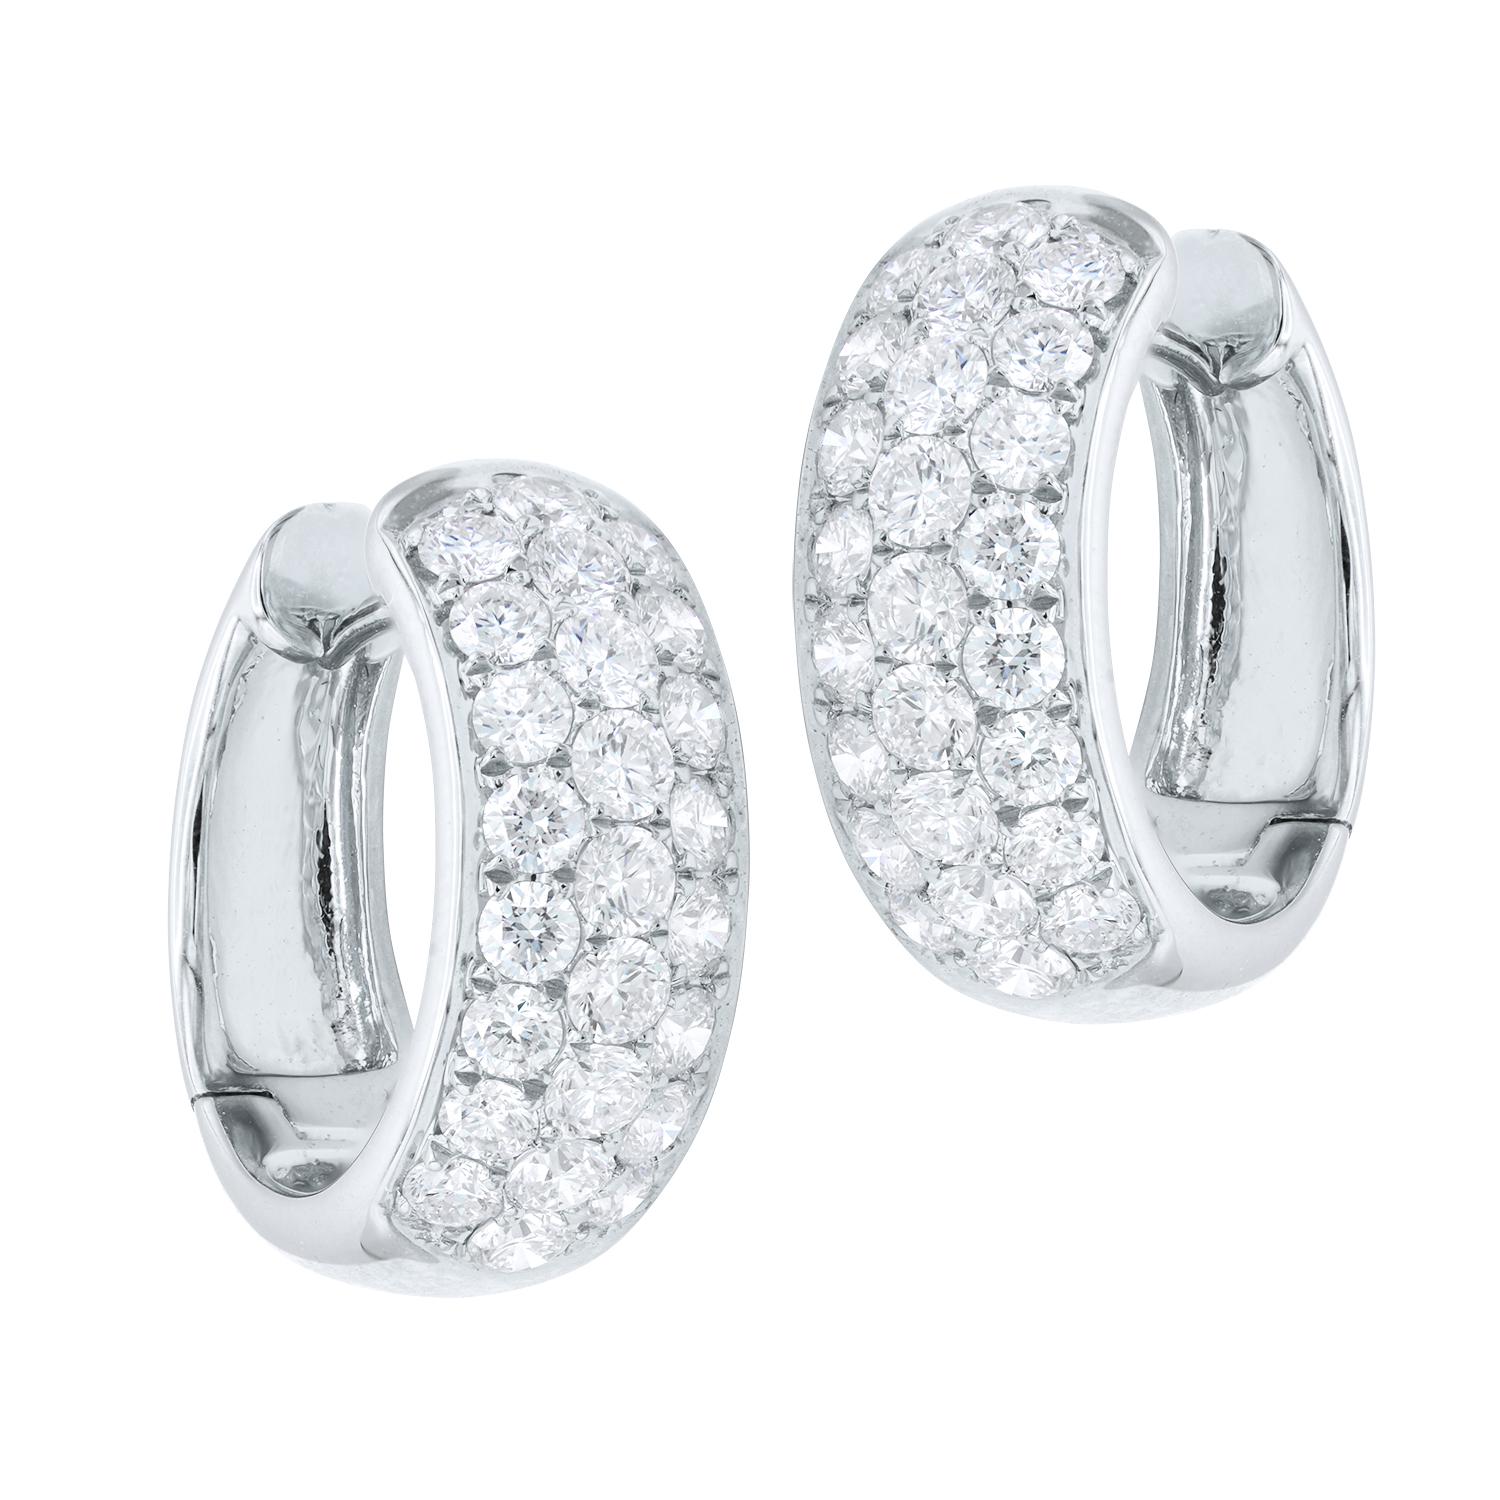 Contemporary 14 Karat White Gold 3 Rows of Diamond, Hoop Earrings For Sale